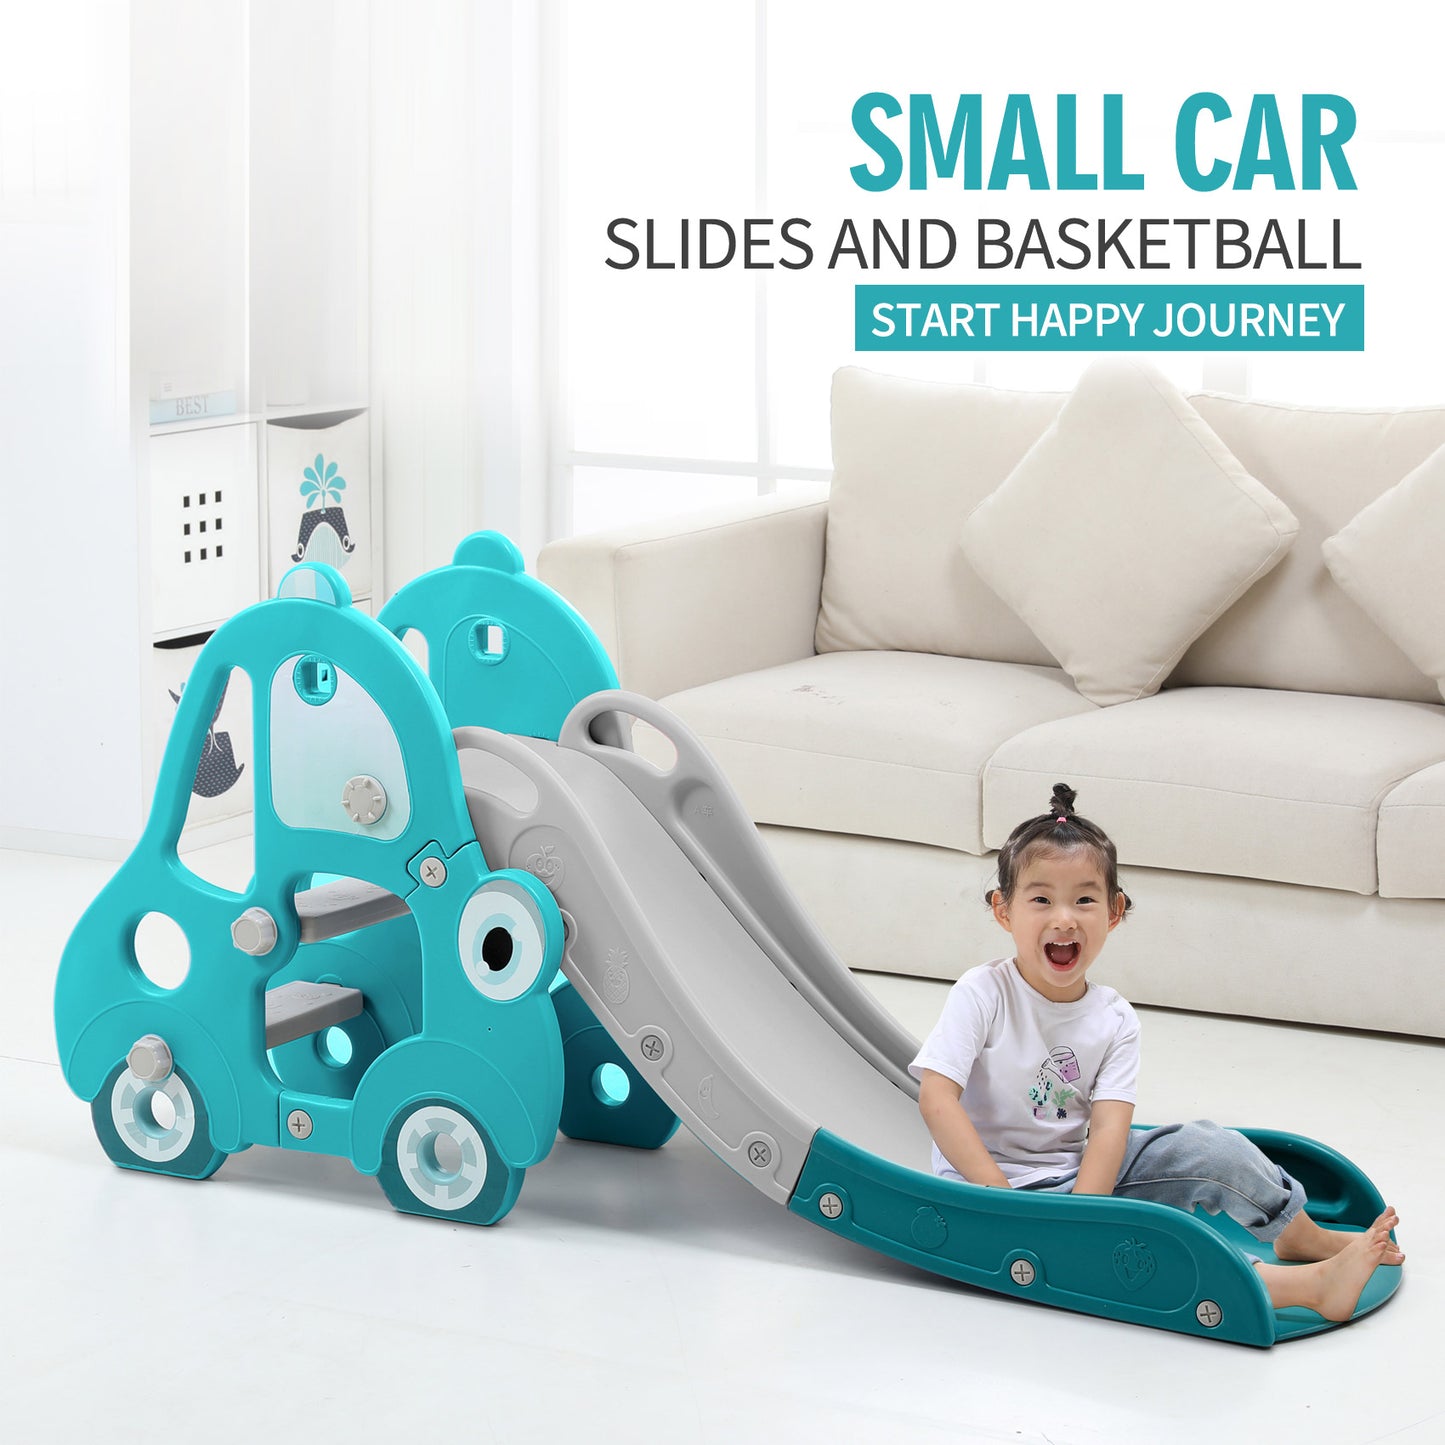 UNICOO – Toddler Car Slide, Kids Large Play Climber Slide Play Set with Extra Long Slipping Slope, Basketball Hoop and Ball, Ideal Gift for Boys and Girls Indoor Outdoor Use